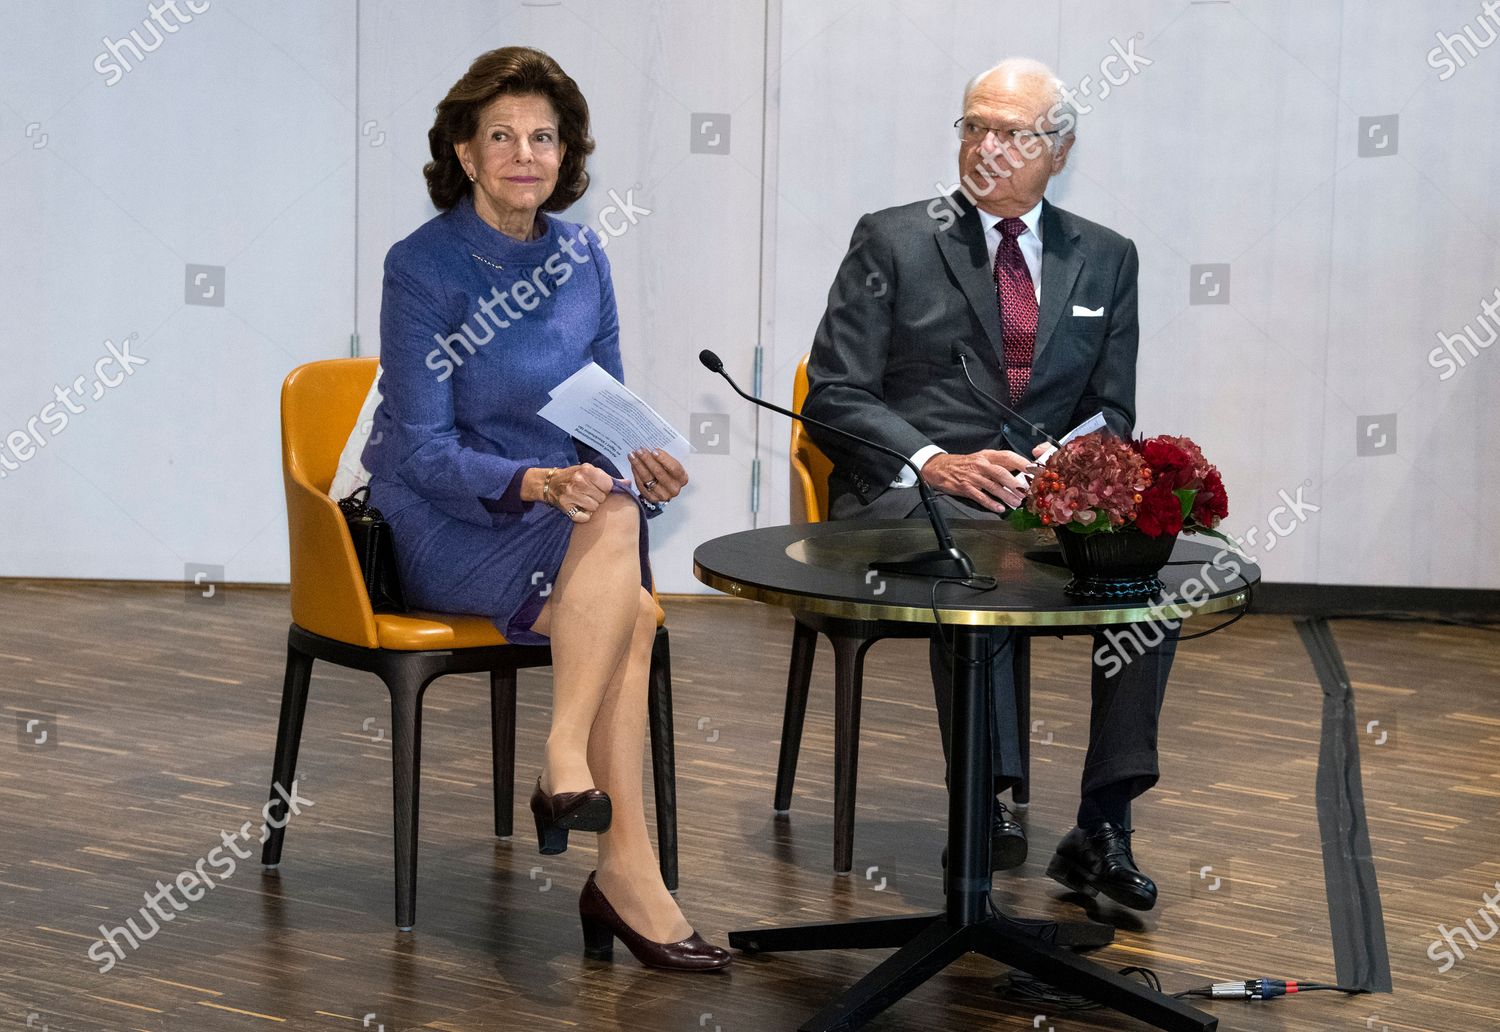 king-carl-gustaf-and-queen-silvia-visit-stockholm-county-sweden-shutterstock-editorial-10952011e.jpg